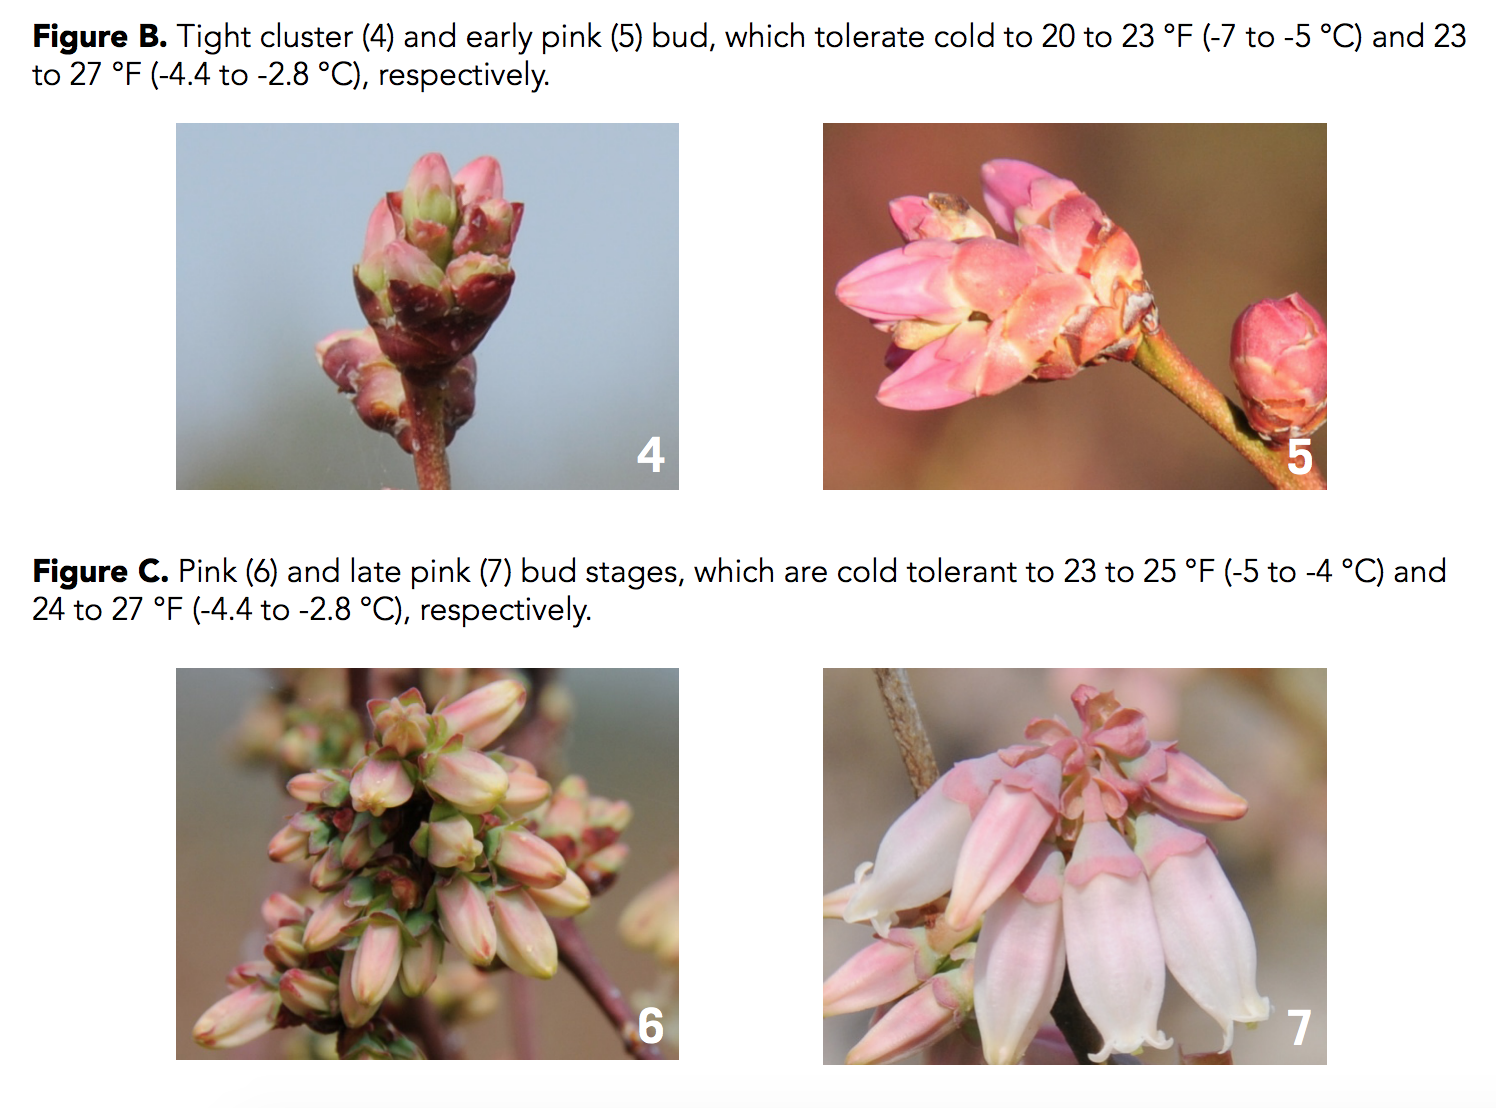 Figure B. Tight cluster (4) and early pink (5) bud, which tolerate cold to 20 to 23 degrees F (-7 to -5 degrees C) and 23 to 27 degrees F (-4.4 to -2.8 degrees C), respectively. Figure C. Pink (6) and late pink (7), which are cold tolerant to 23 to 25 degrees F (-5 to -4 degrees C) and 24 to 27 degrees F (-4.4 to -2.8 degrees C), respectively.